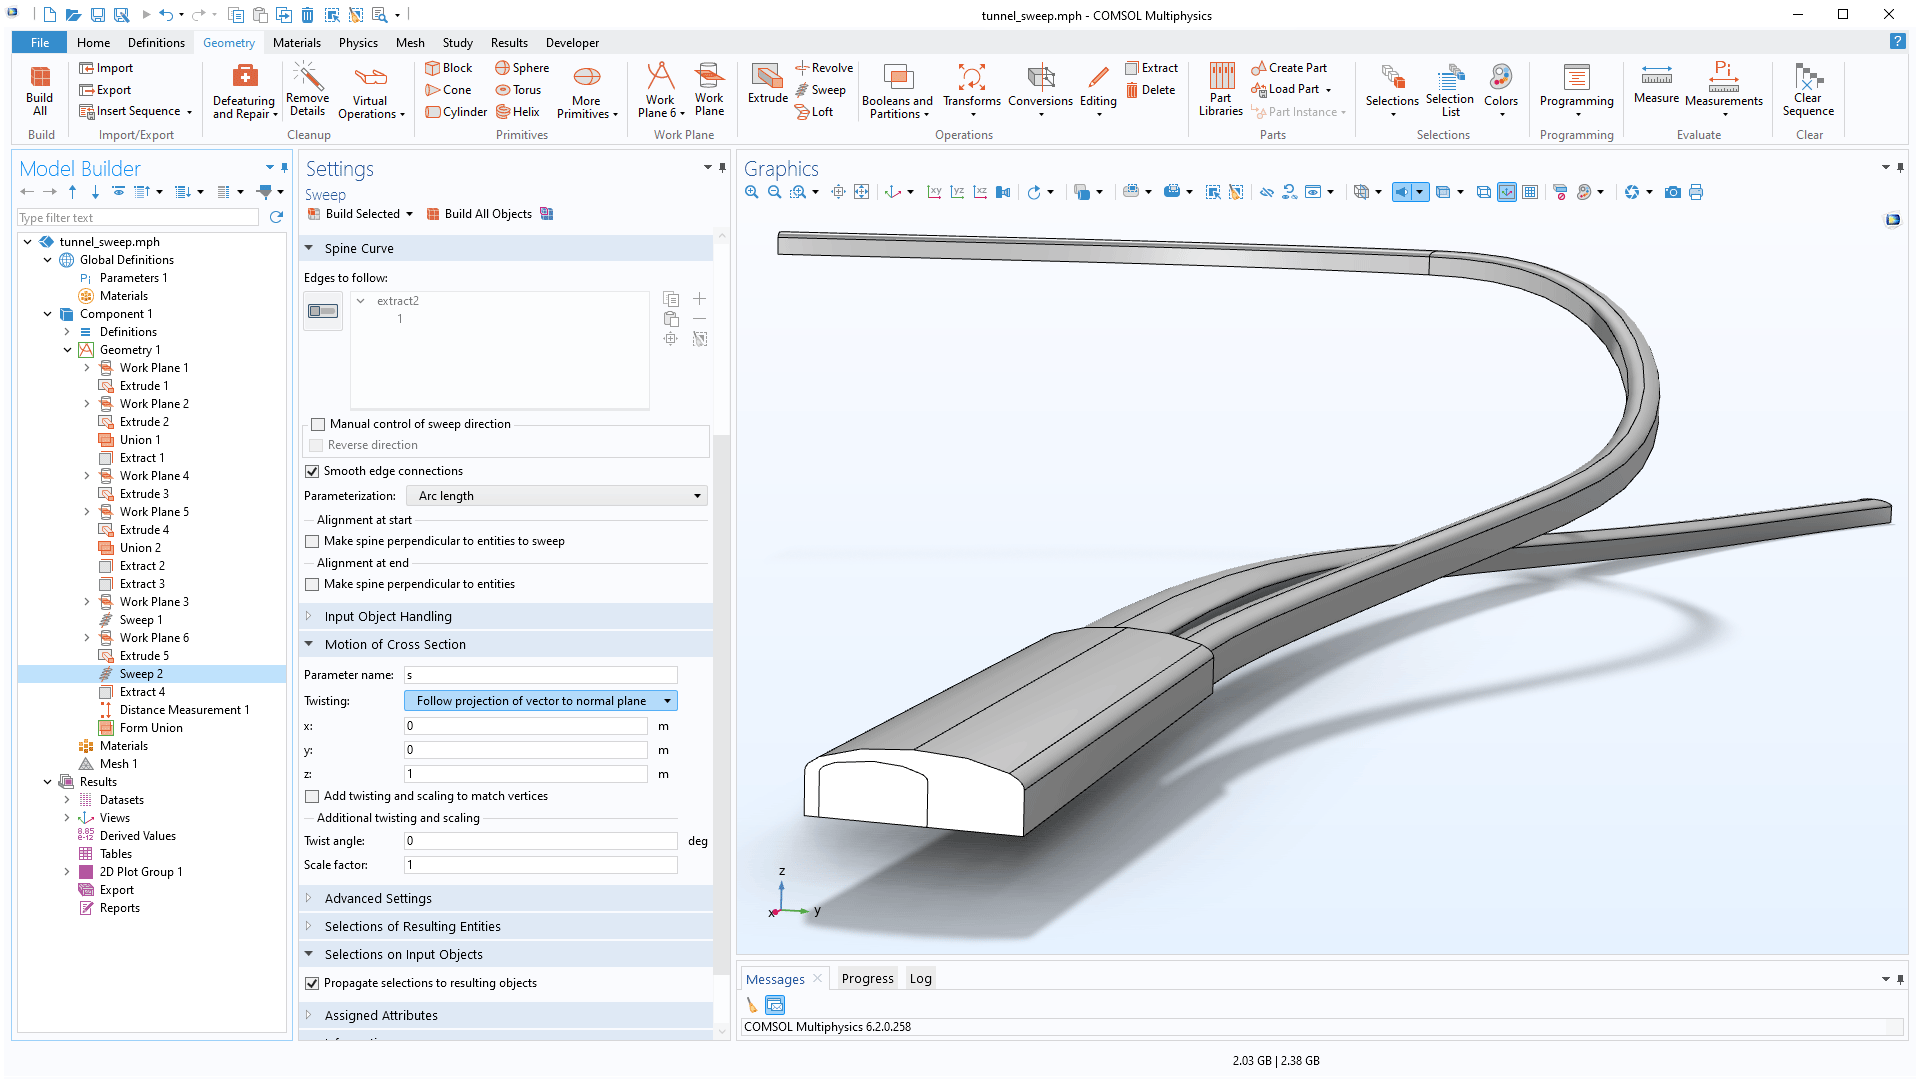 The COMSOL Multiphysics UI showing the Model Builder with the Sweep node highlighted, the corresponding Settings window, and a tunnel model in the Graphics window.